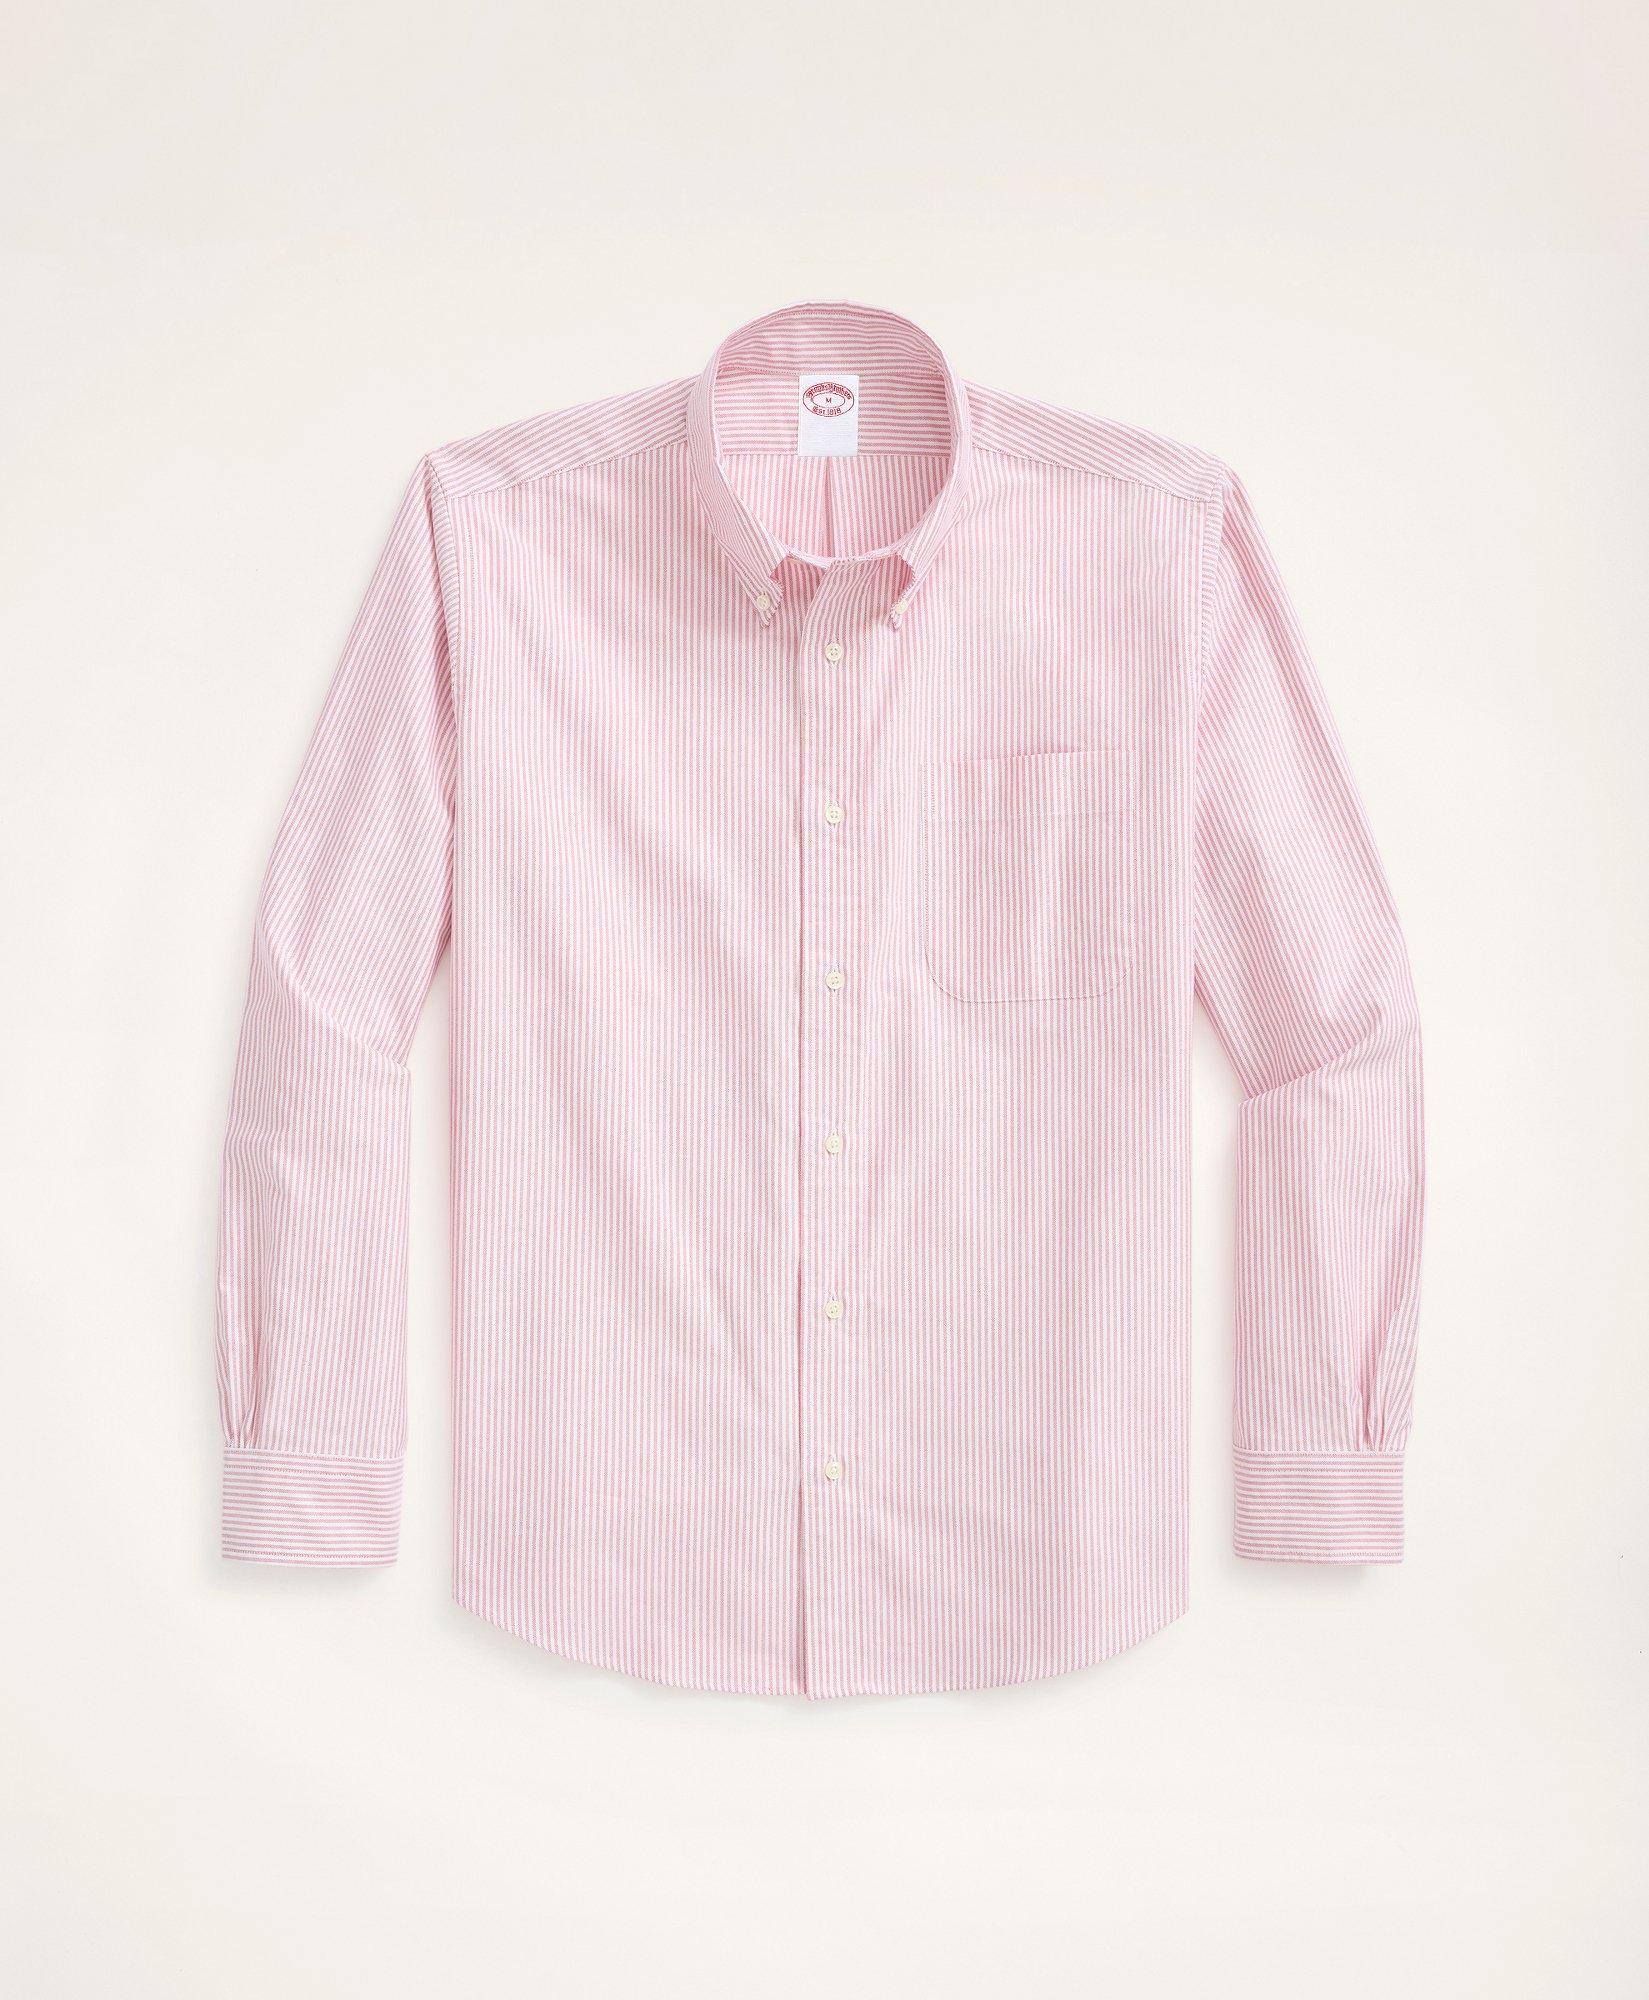 Women's Oxford Button Down Shirts | Brooks Brothers